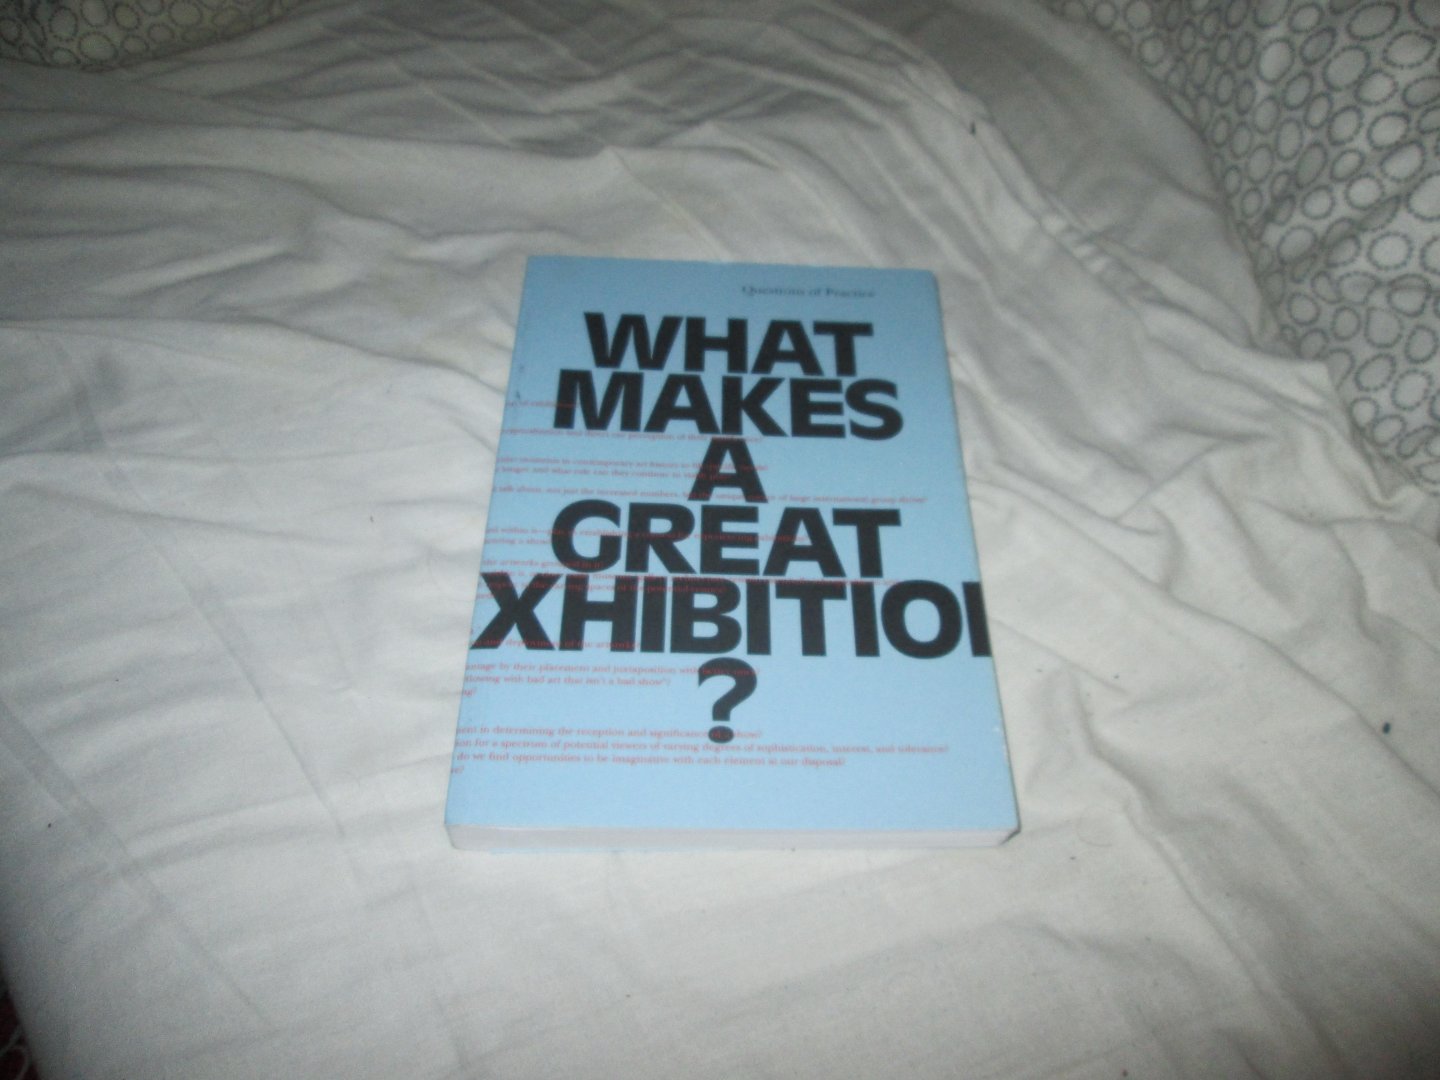 Marincola , Paula ( editor ) - WHAT MAKES A GREAT EXHIBITION ? ; Questions of Practice